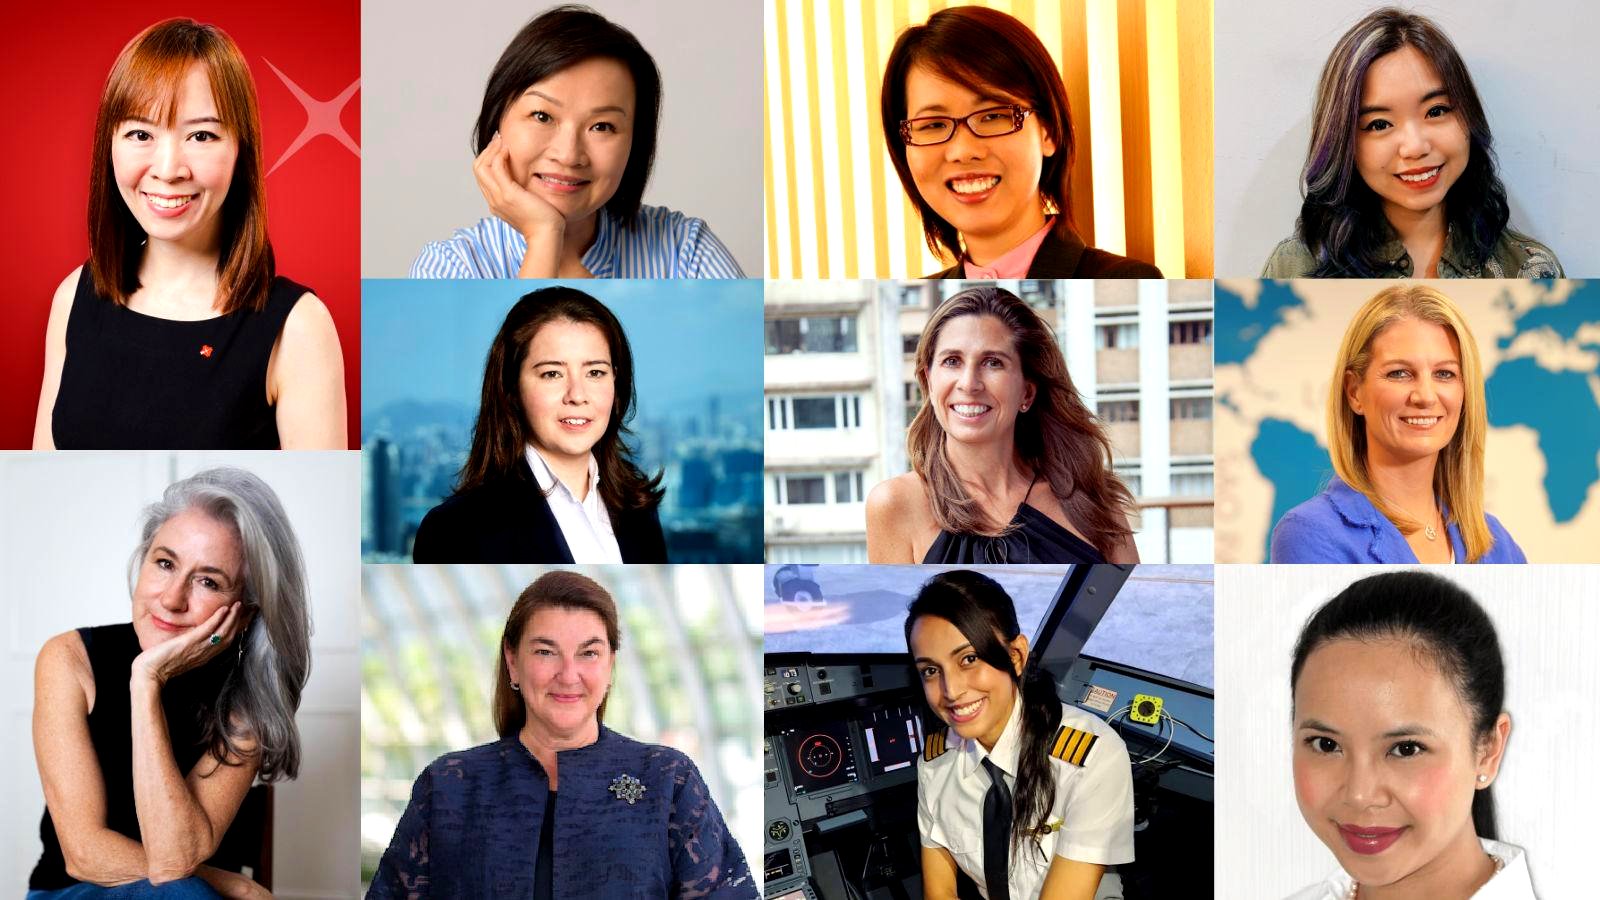 How these 11 leaders enable a culture that speaks to all women who are looking to step up